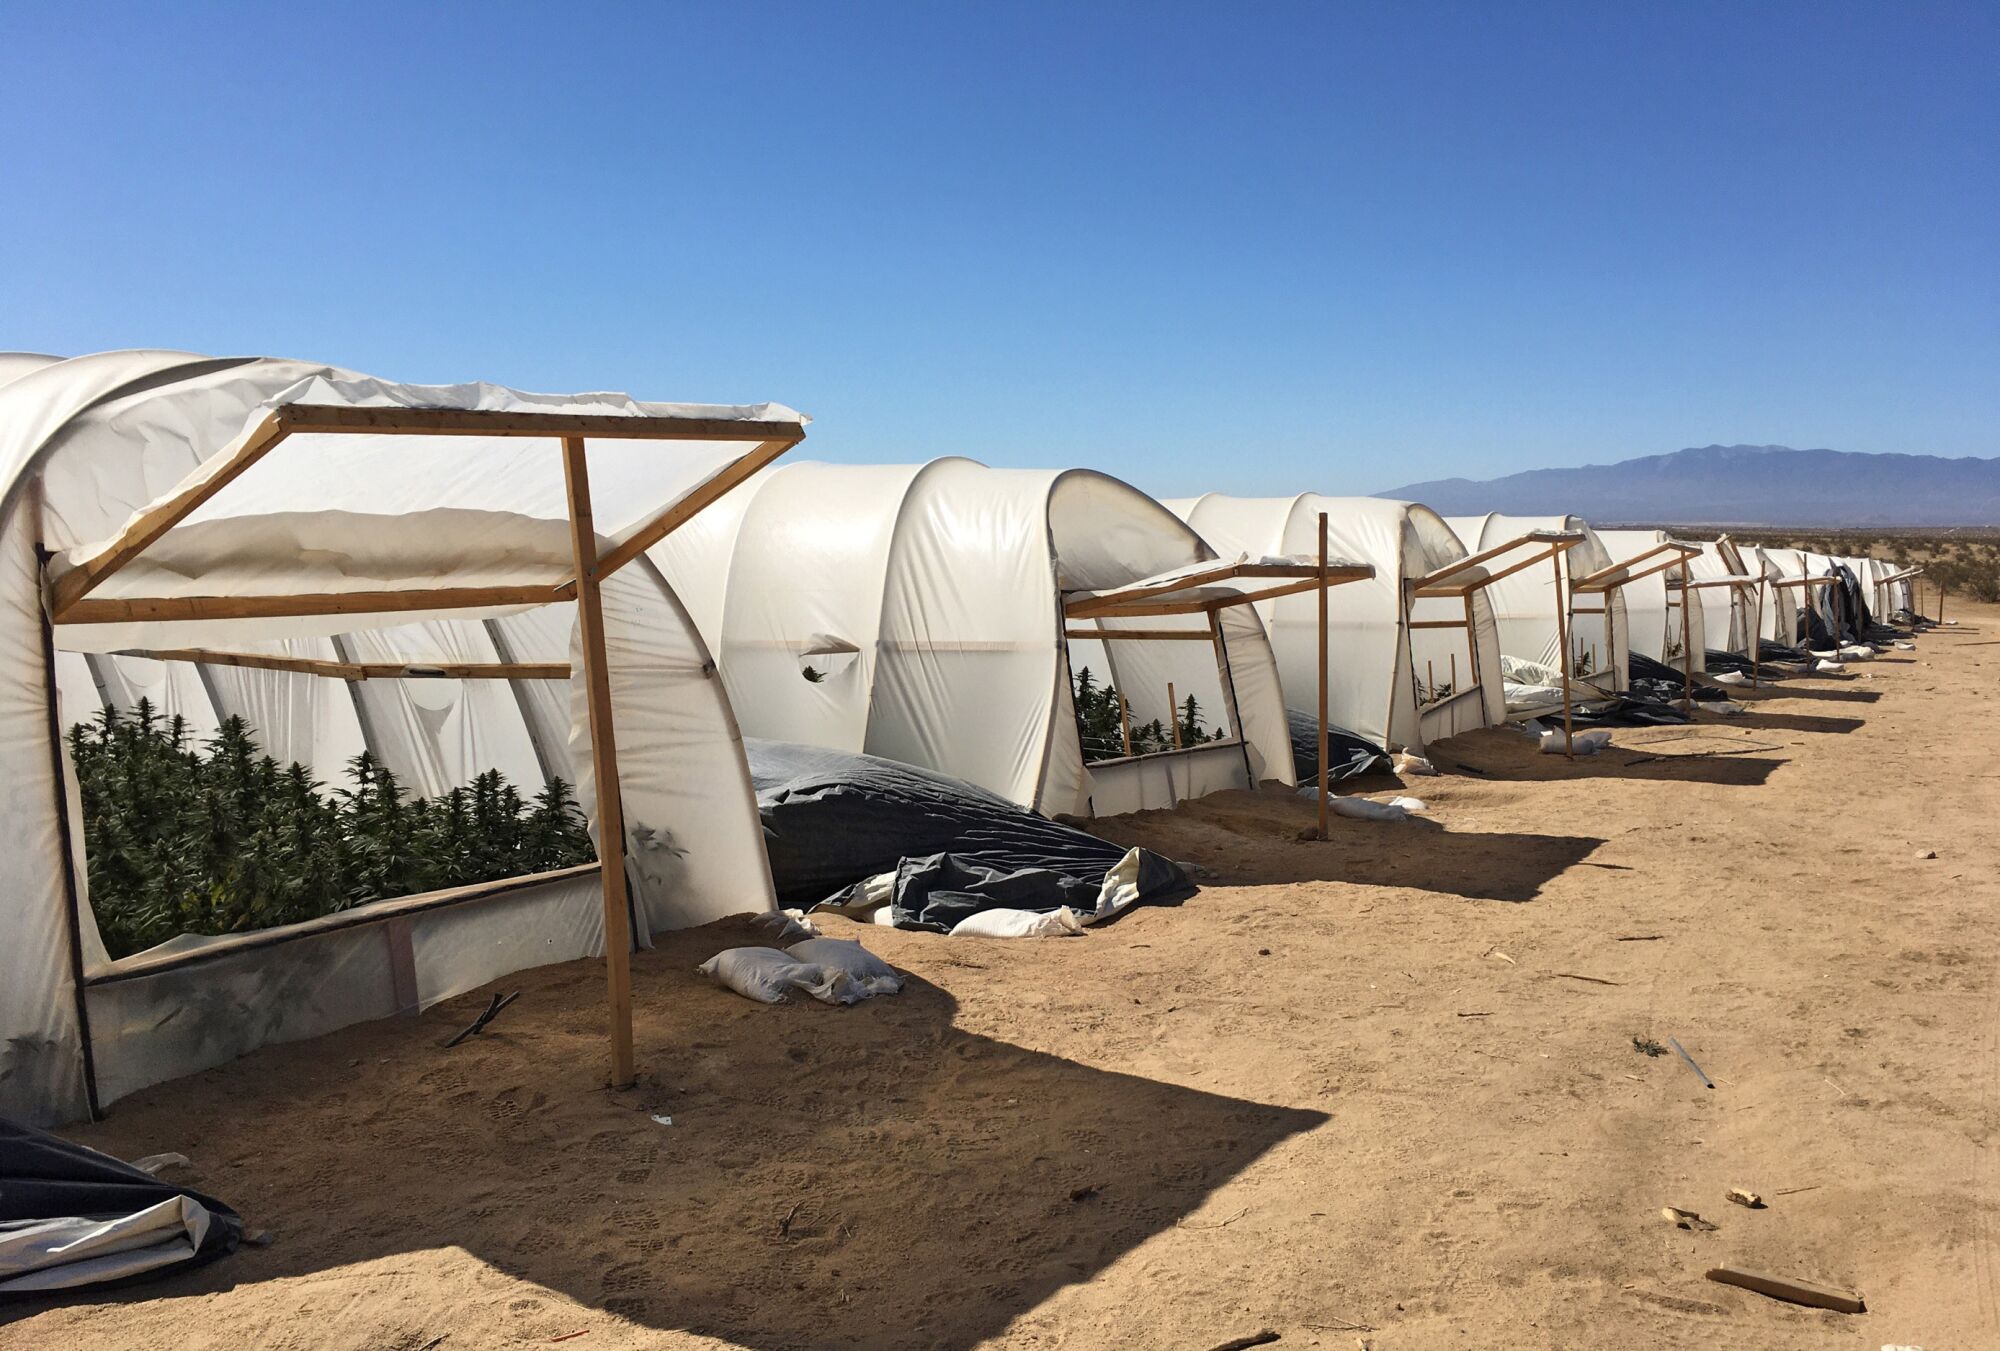 Authorities seized tens of millions of dollars worth of illegal marijuana grown in the Antelope Valley